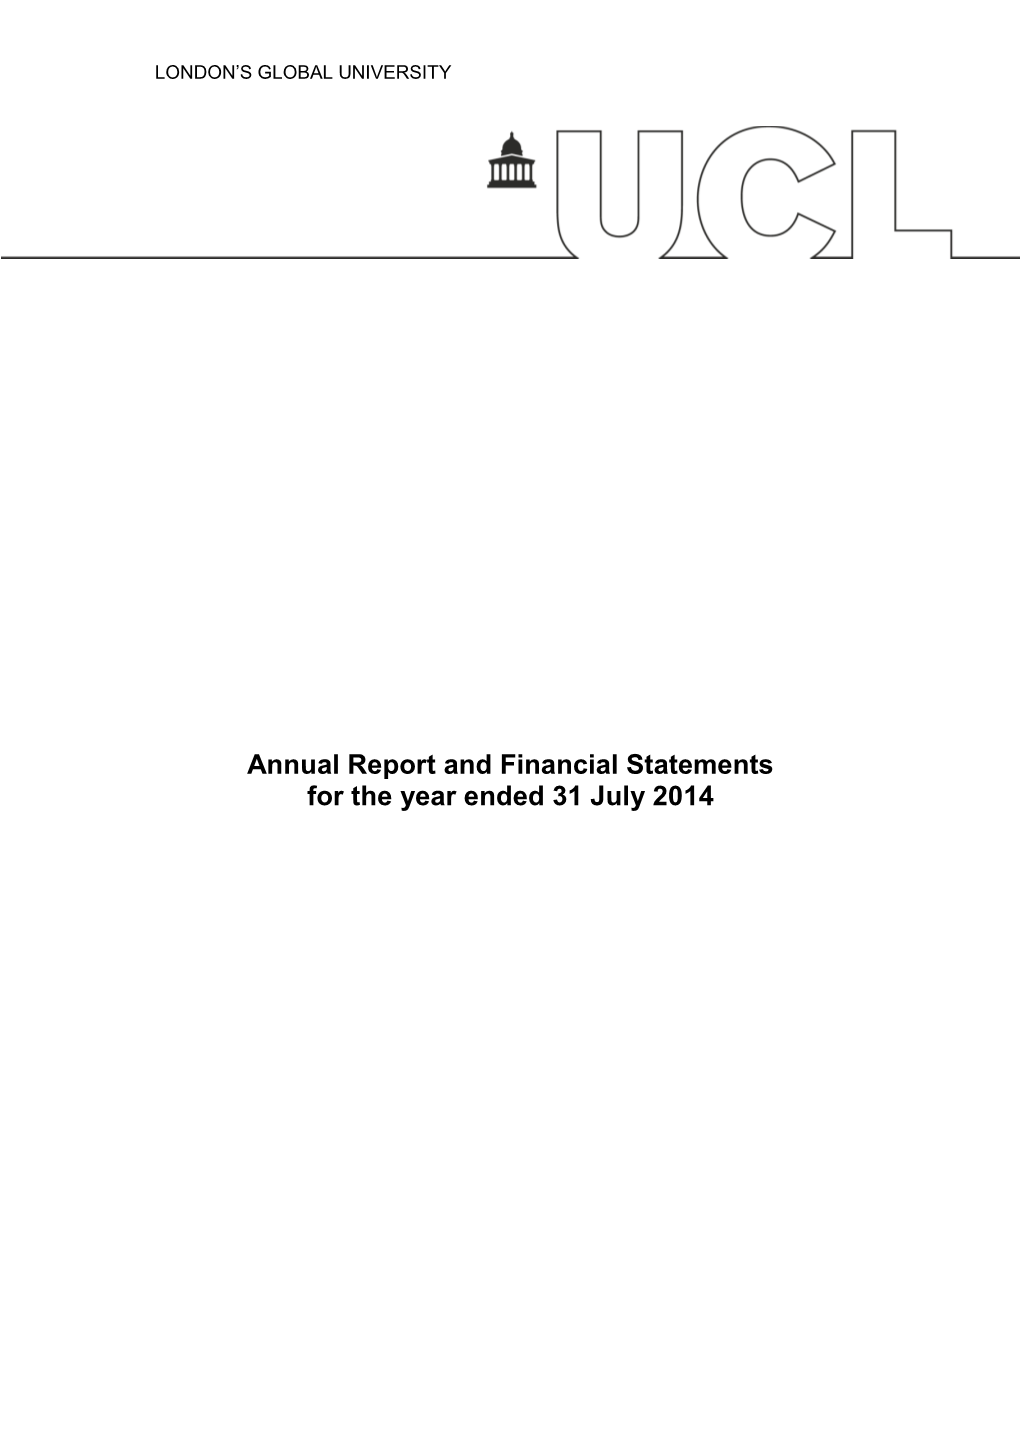 Annual Report and Financial Statements for the Year Ended 31 July 2014